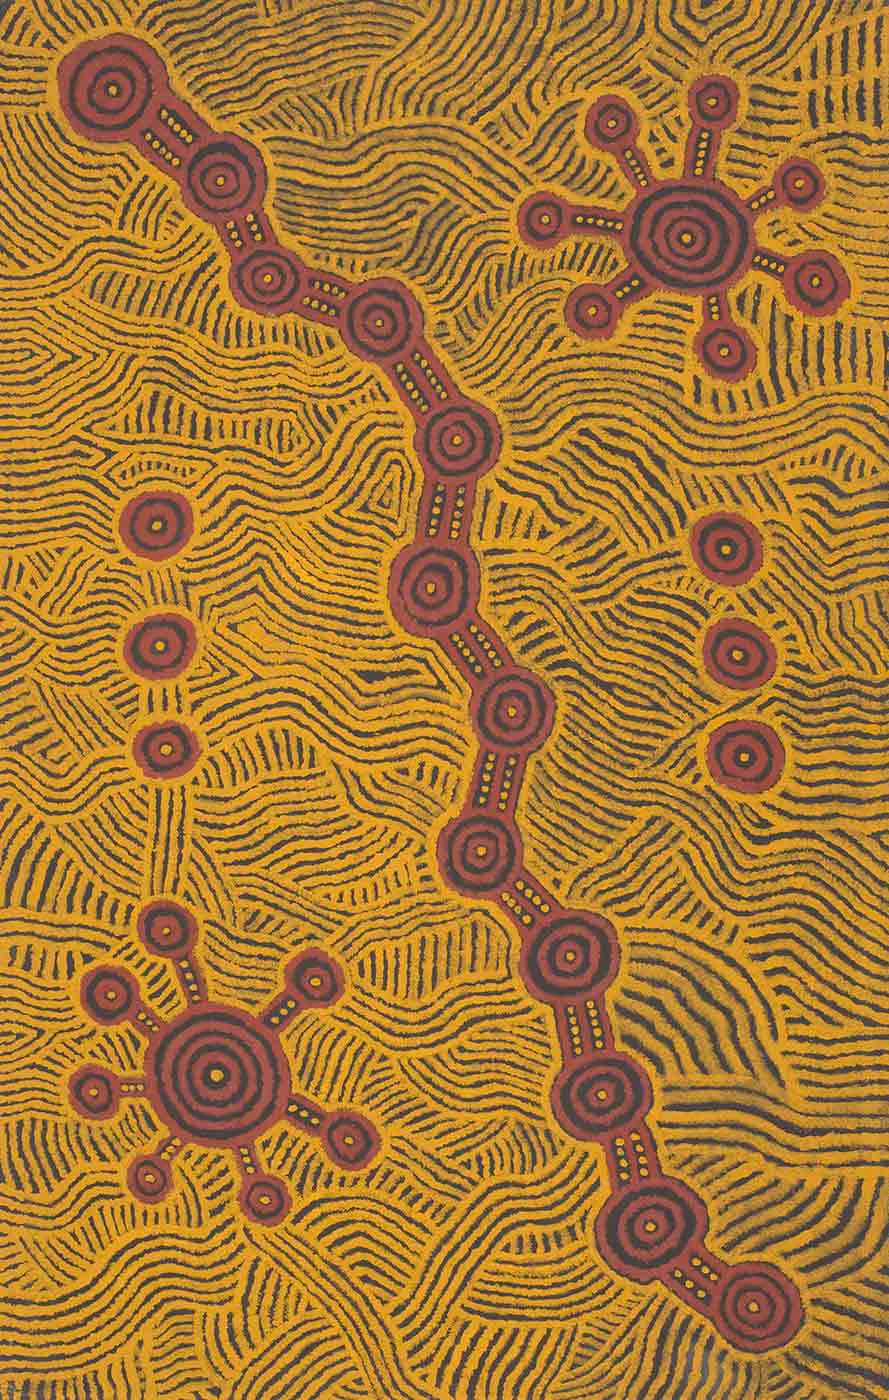 Painting depicting an intricate design in ochre colours. - click to view larger image